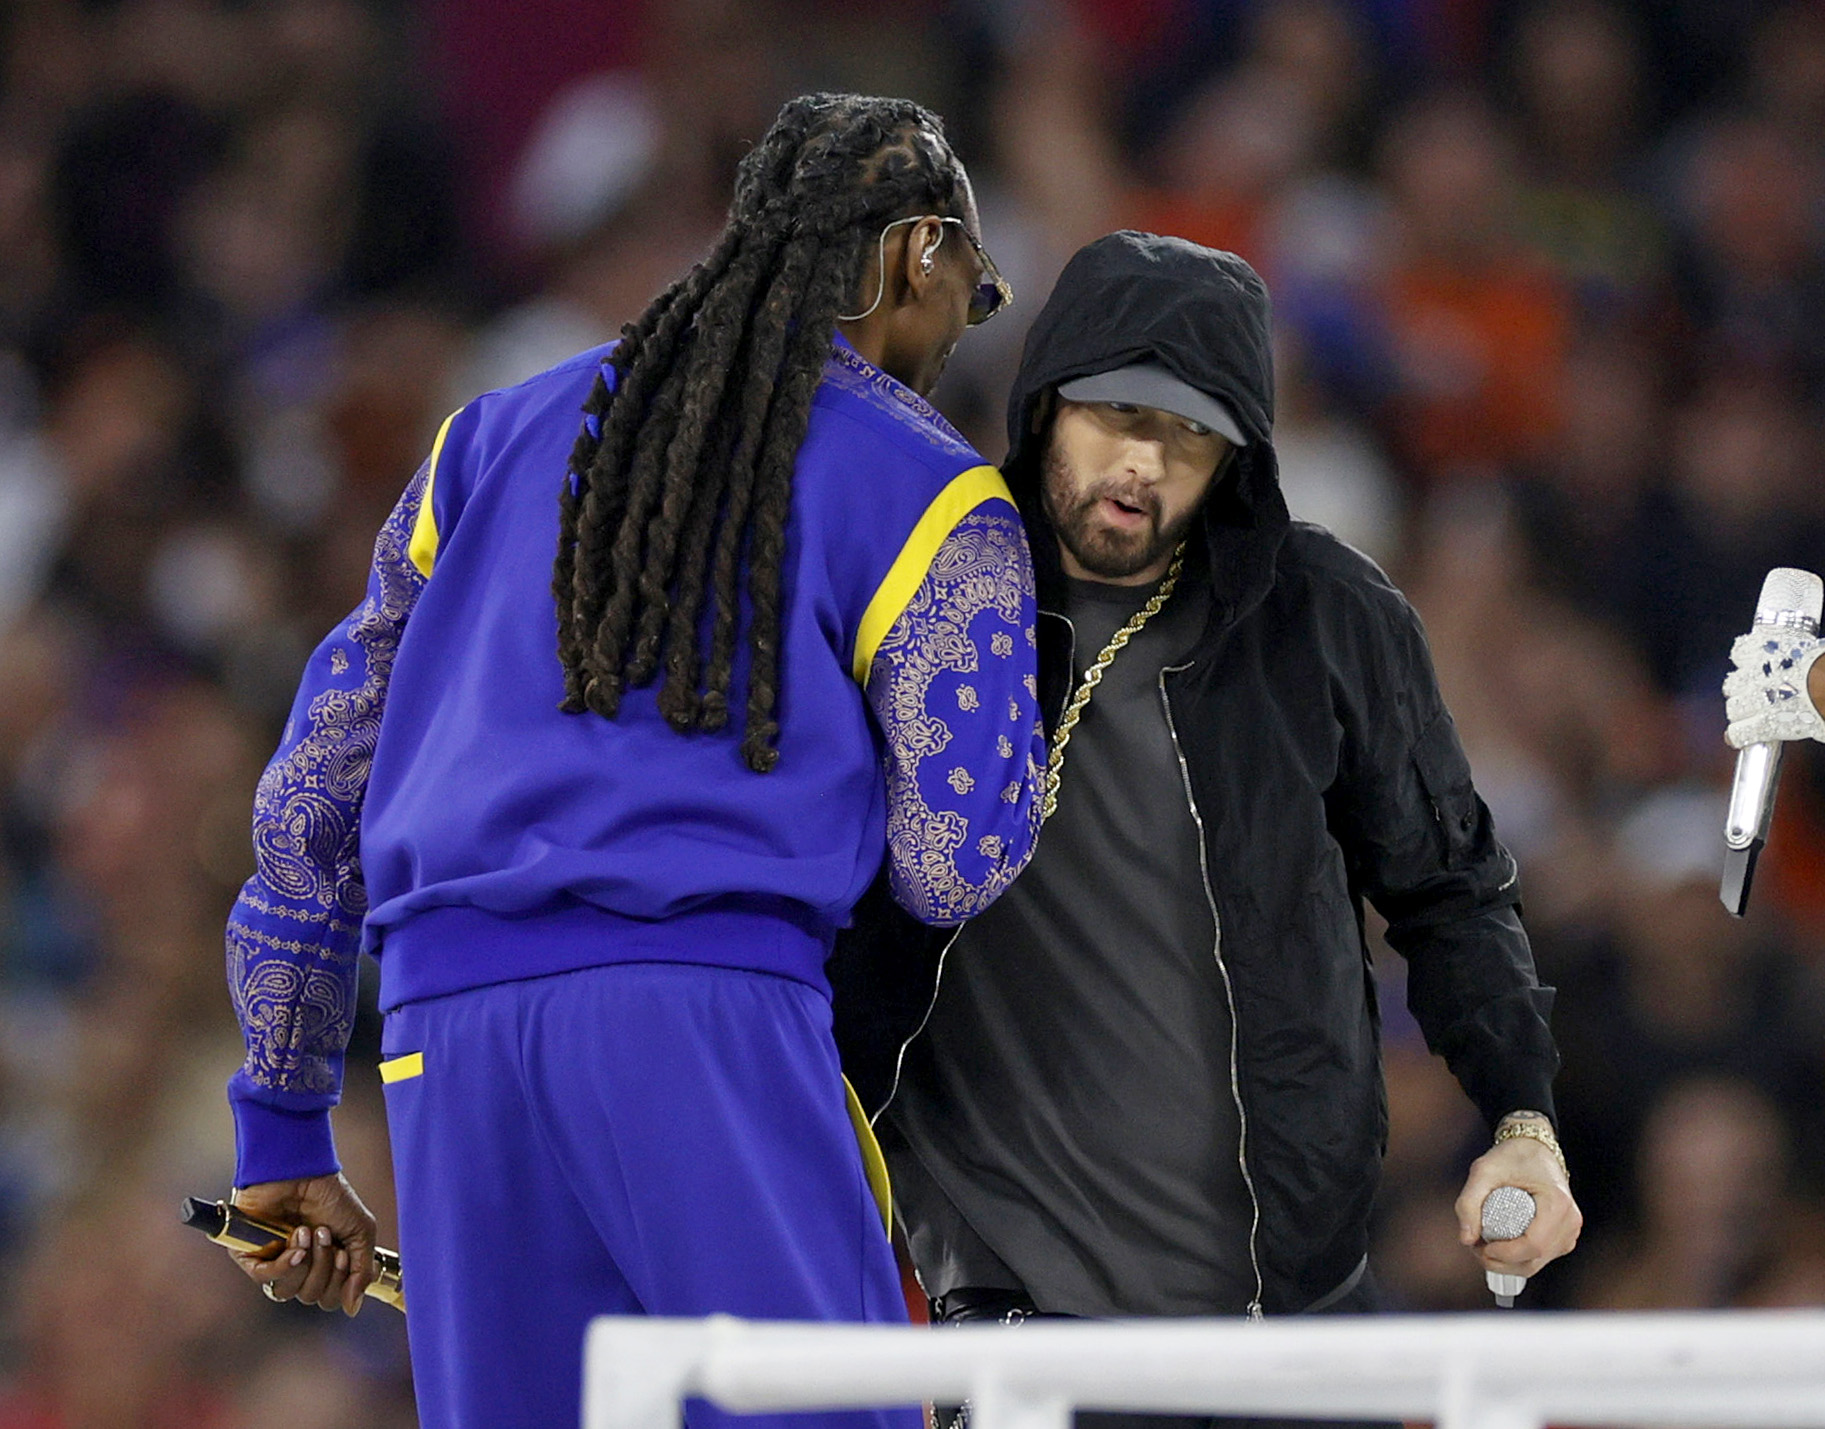 Eminem Reveals How He & Snoop Dogg Ended Their Beef